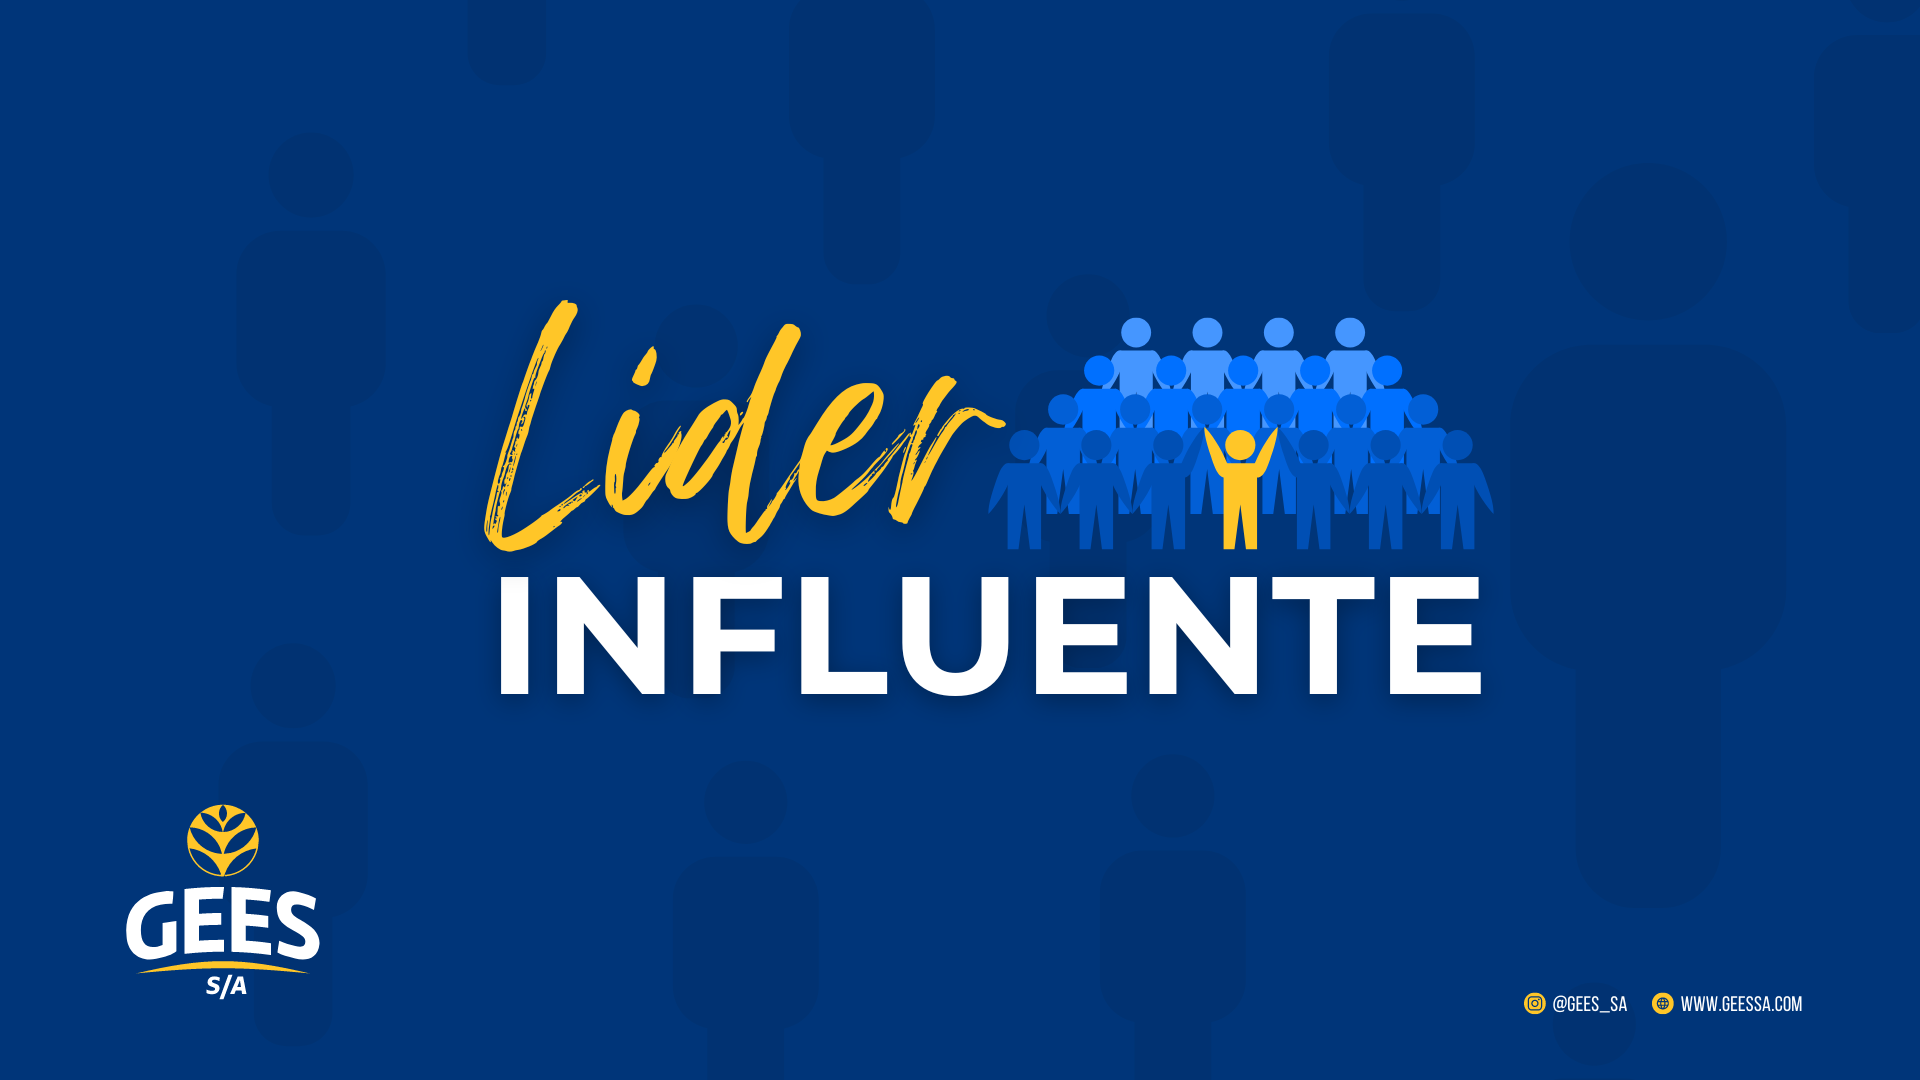 LIDER INFLUENTE GEES S/A